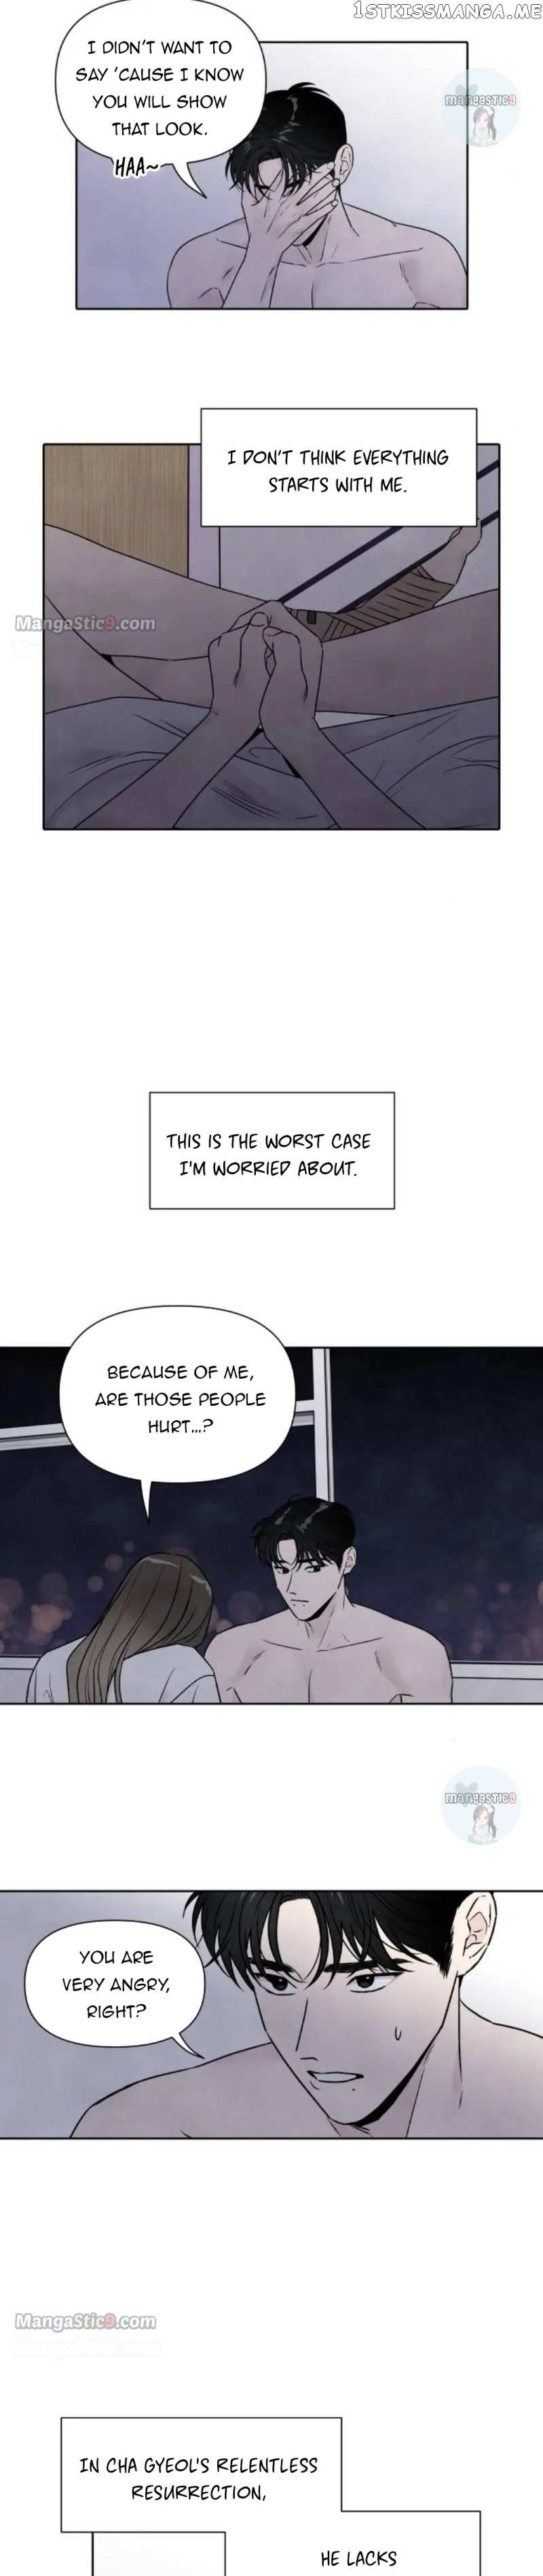 My Reason to Die  - page 2